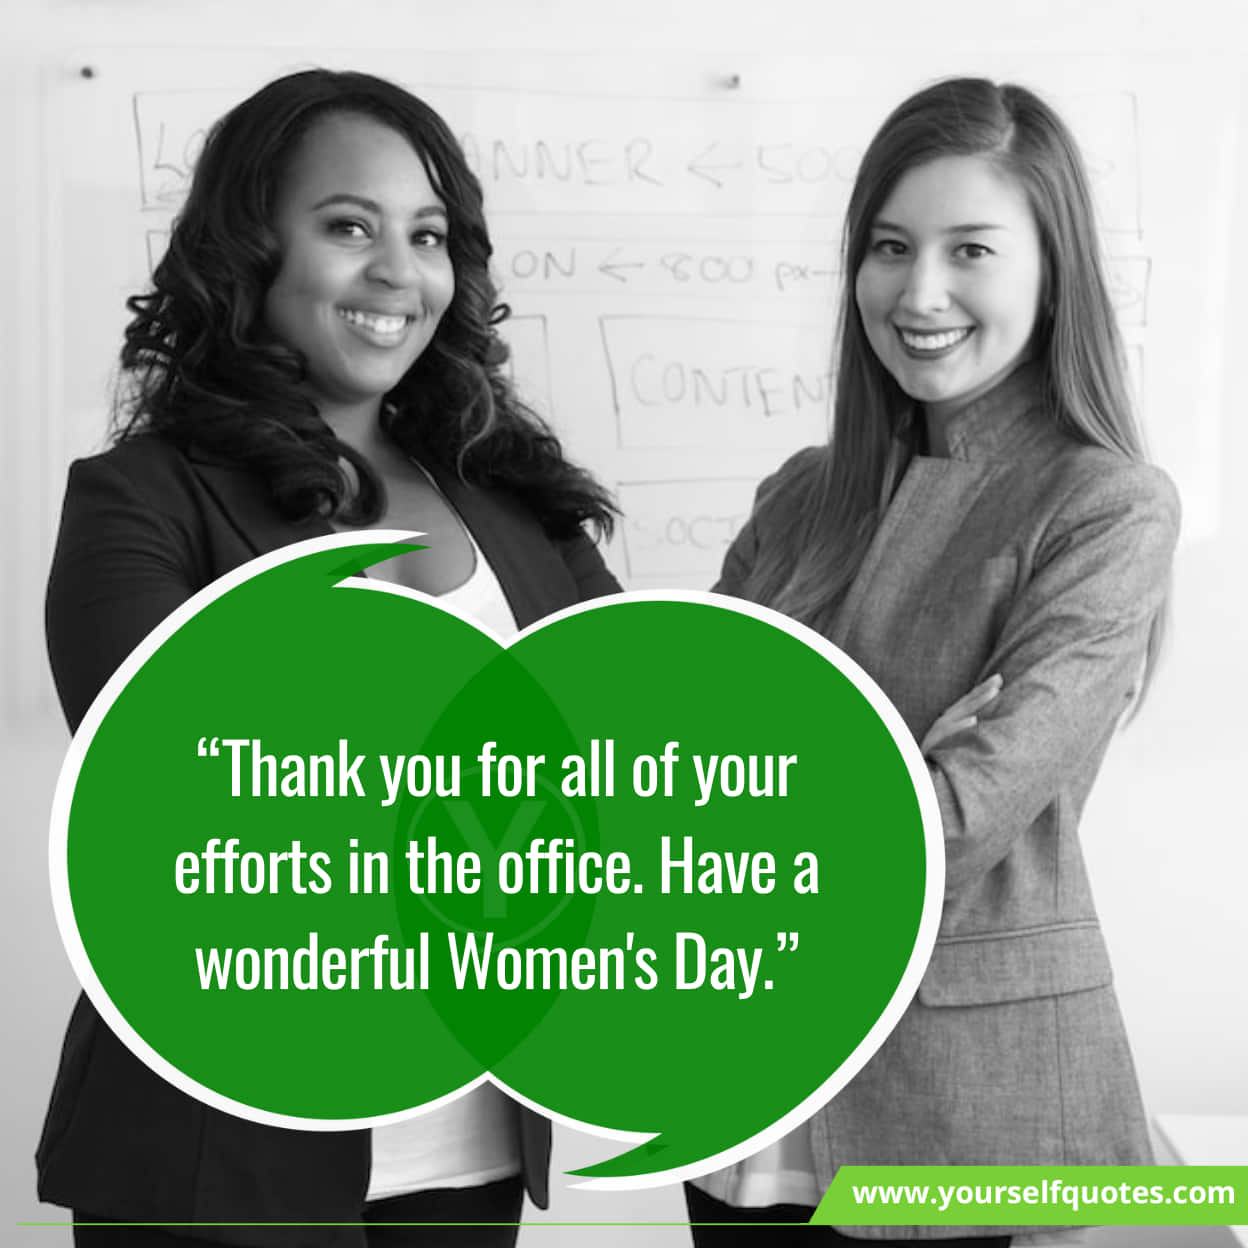 Motivational Women's Day Wishes to Employees